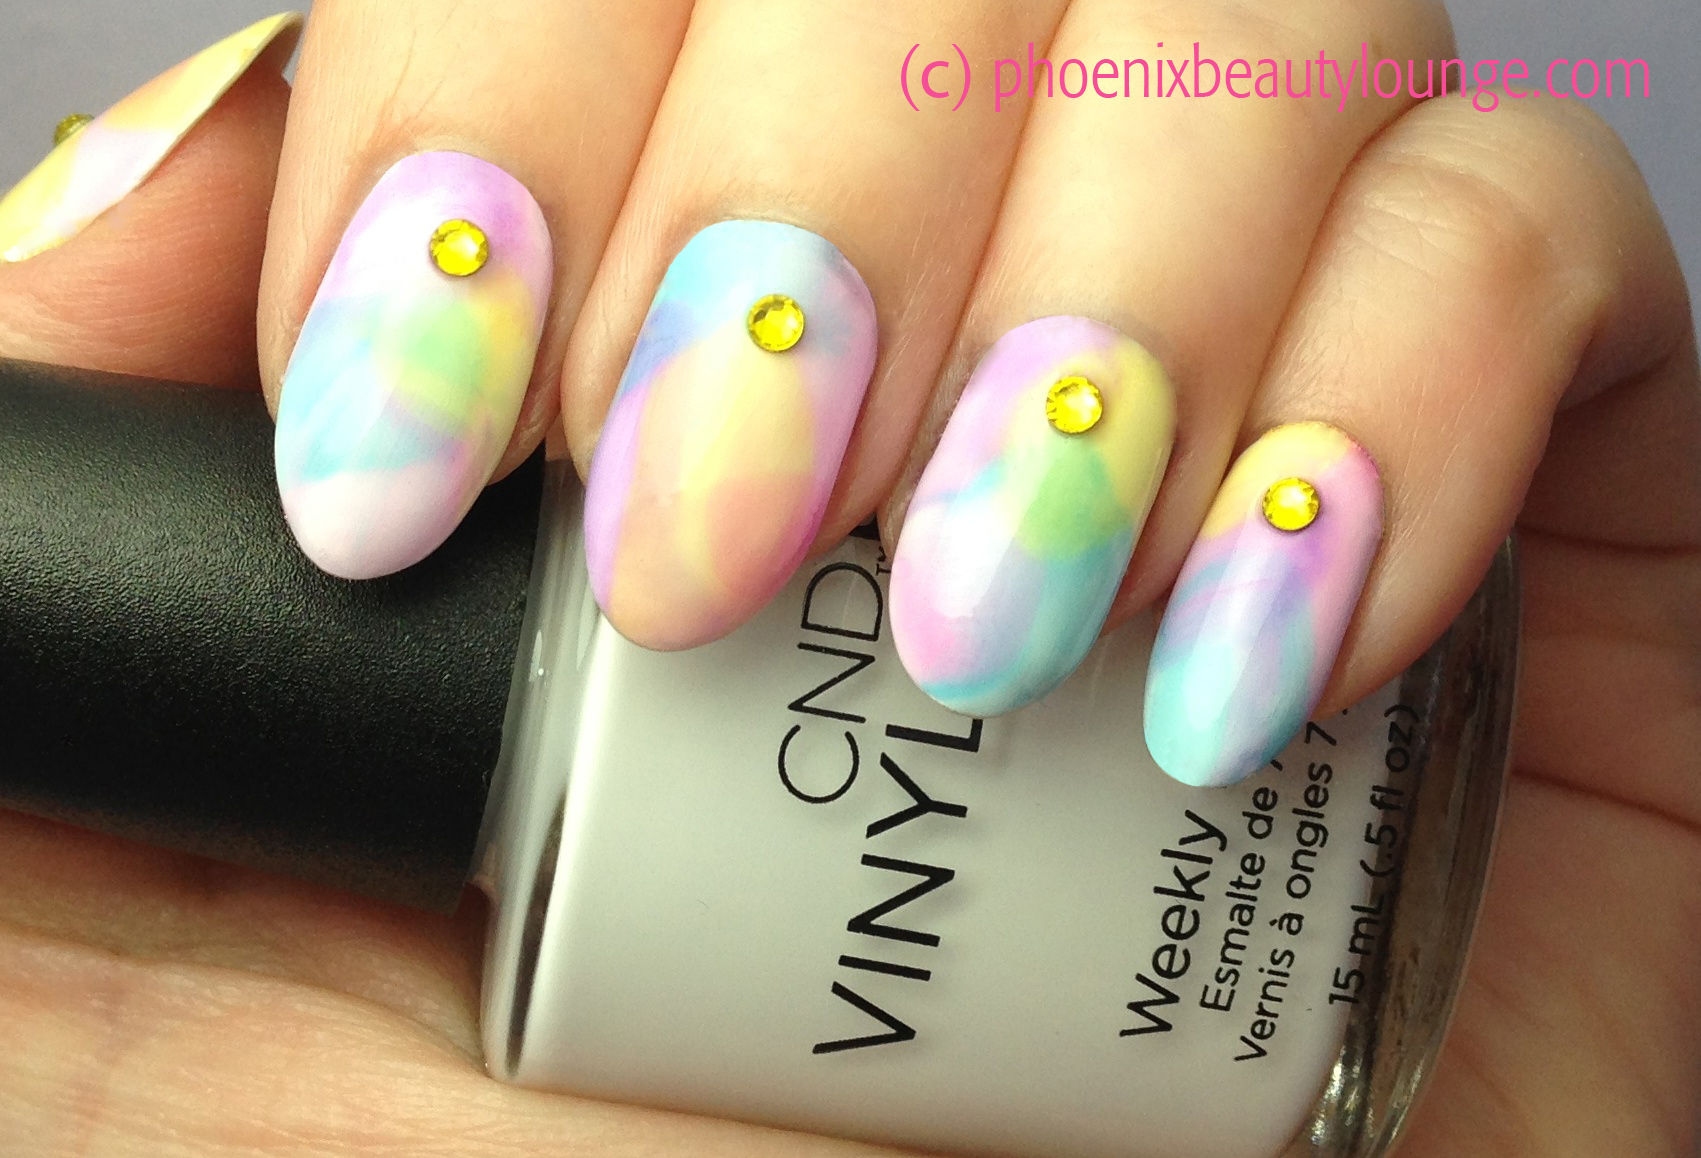 7. Watercolor Nail Art for Pink and White Nails - wide 6